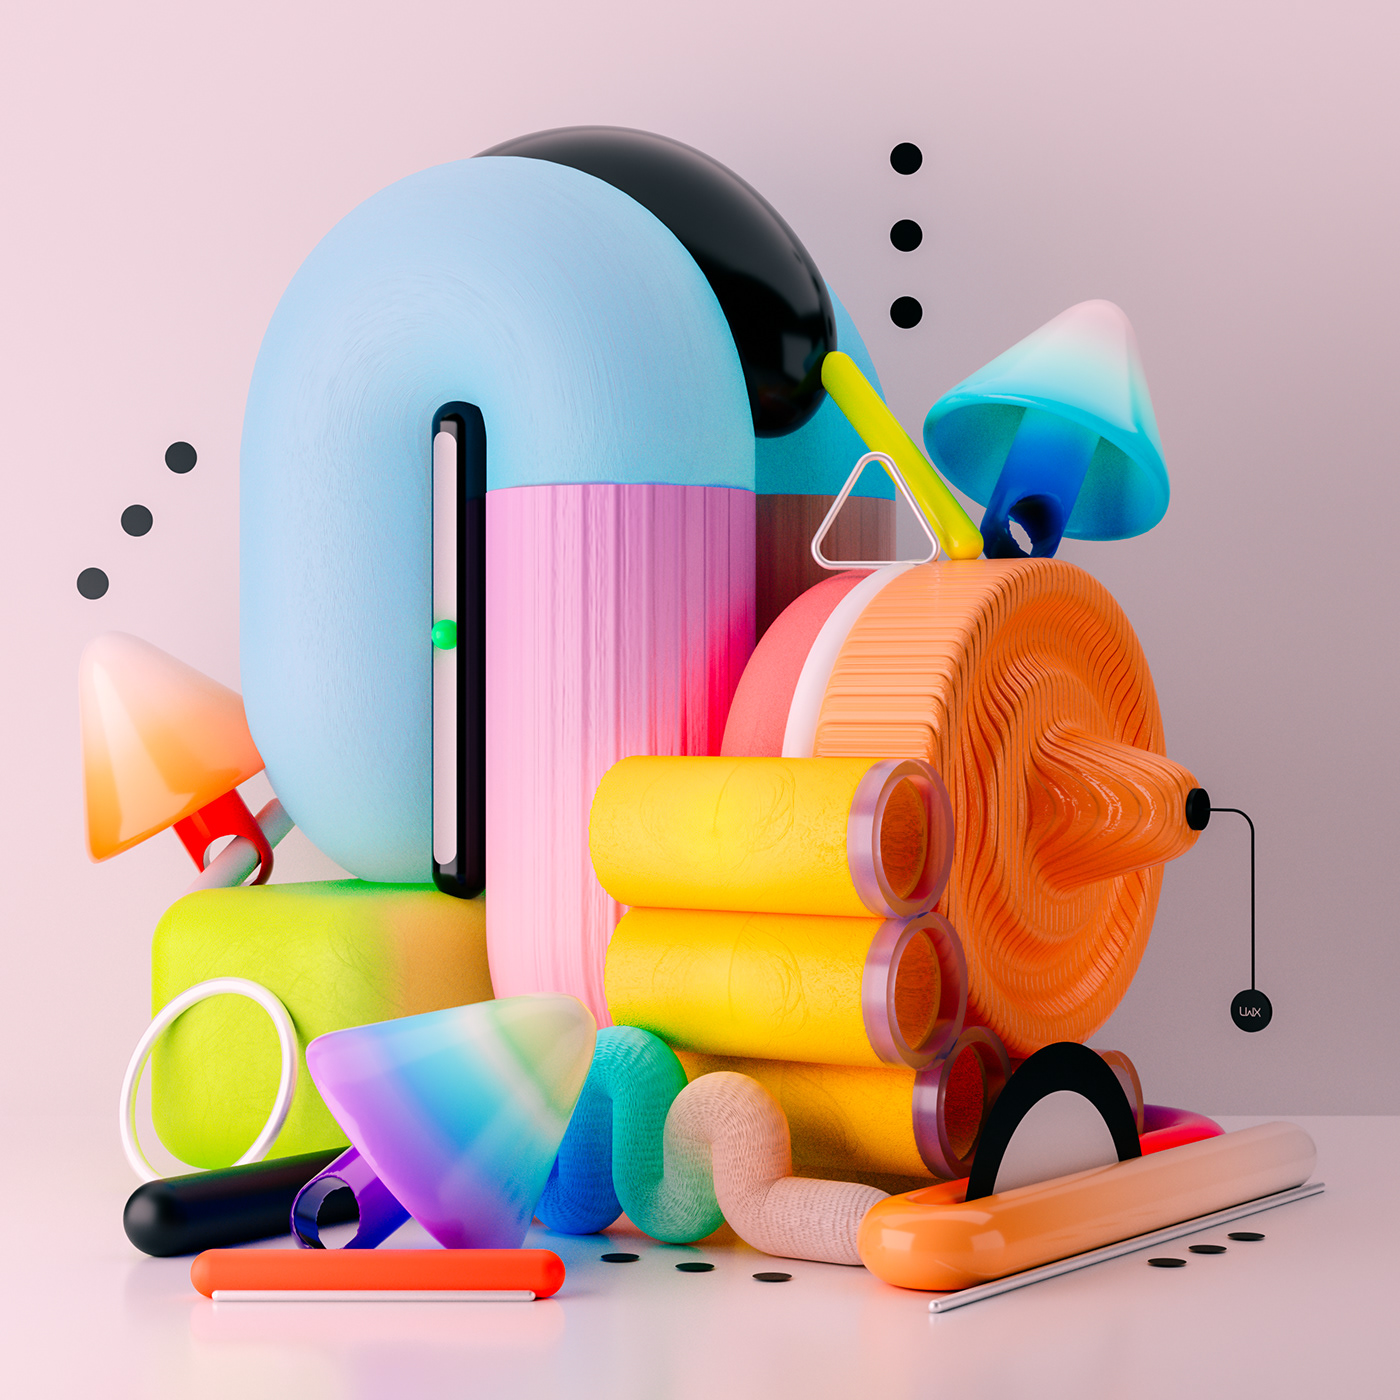 typography 3d abstract colorful Texture Design dreamy geometric Patterns illustrations 3DType fightforkindness